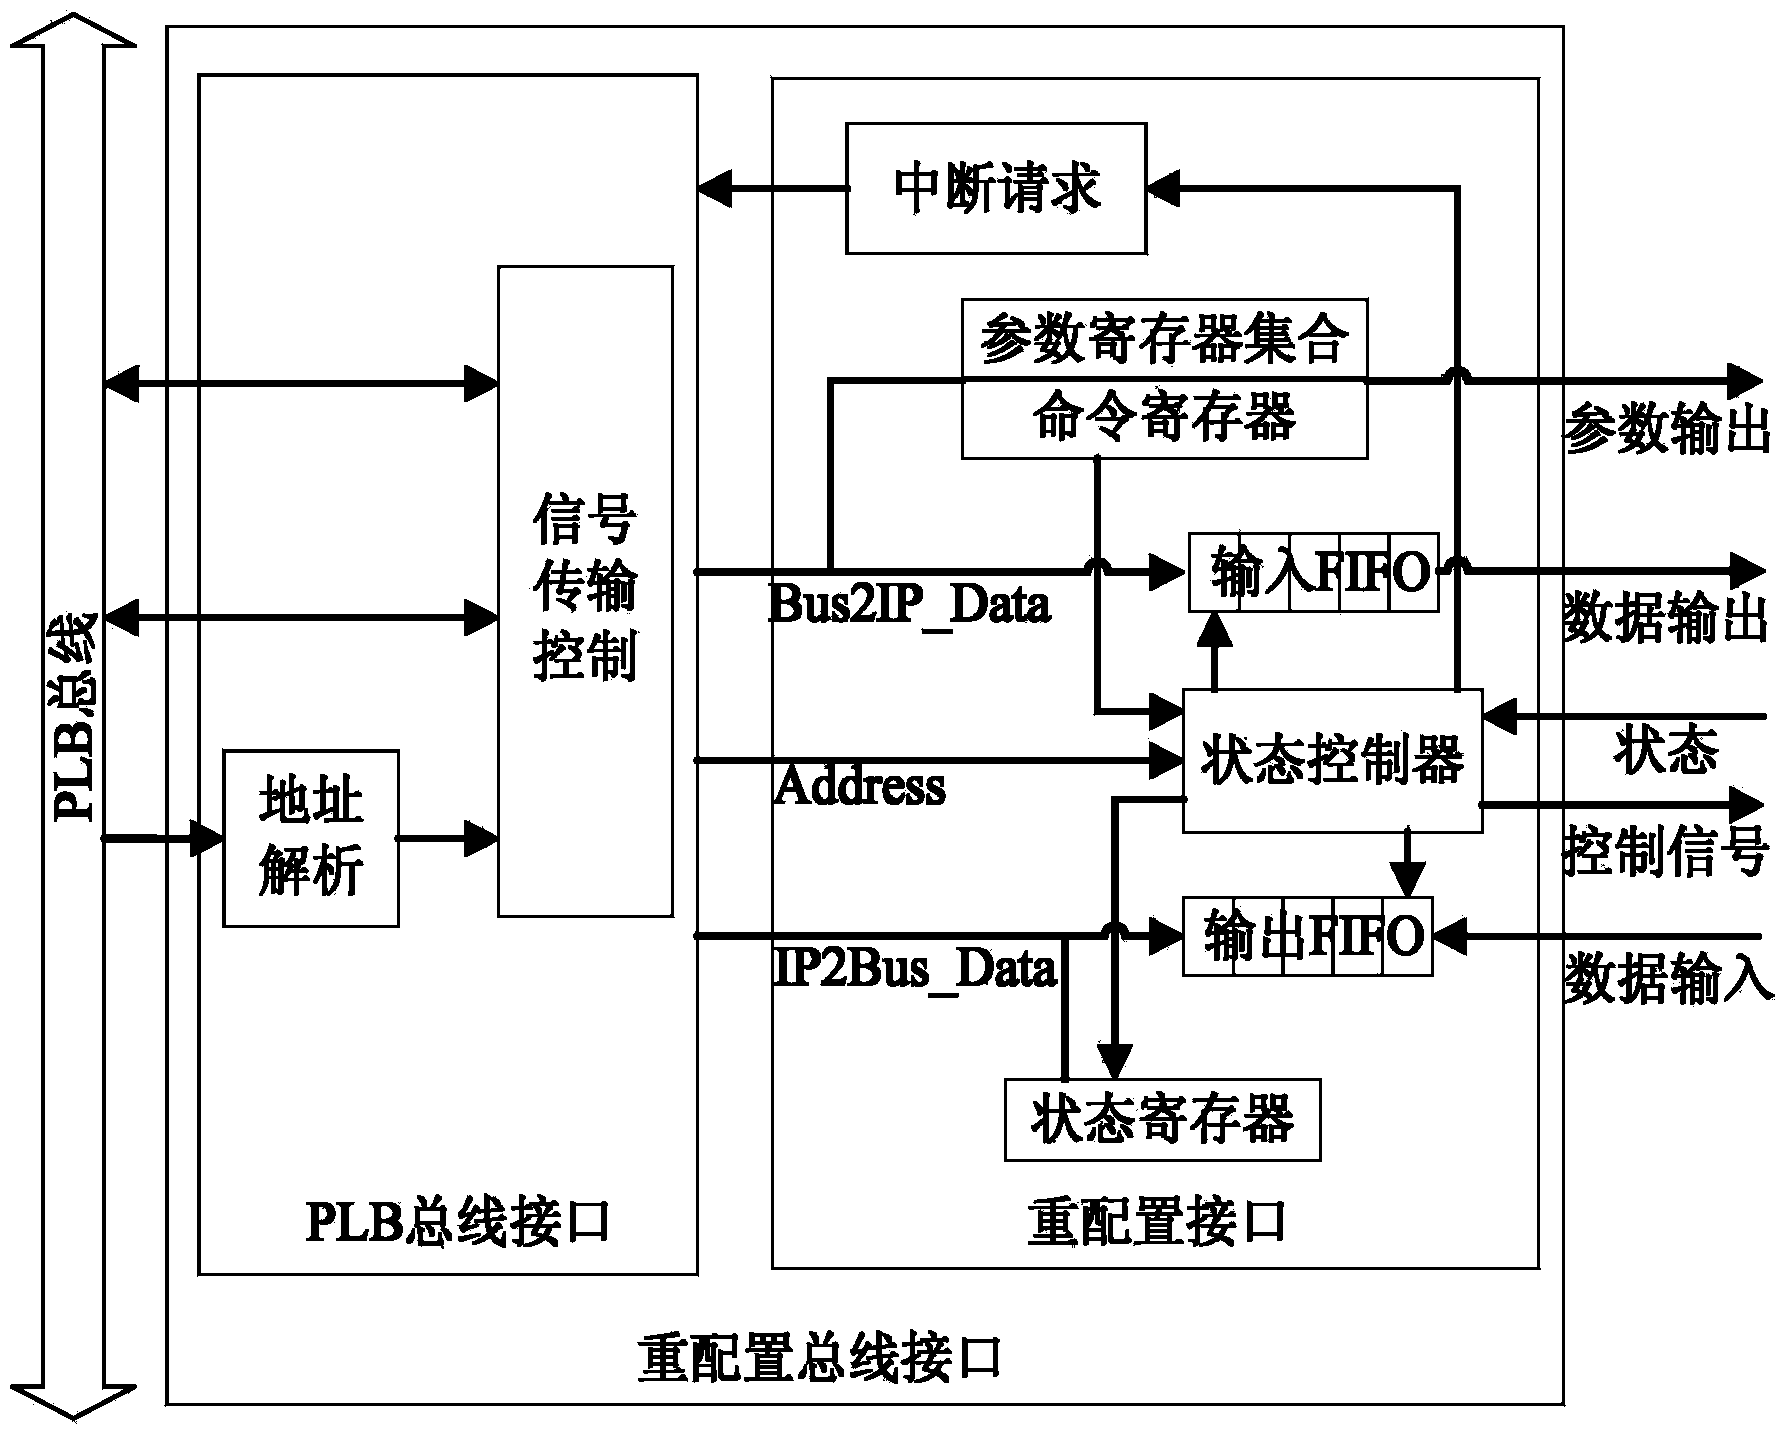 On-line reconfiguration system and method based on FPGA